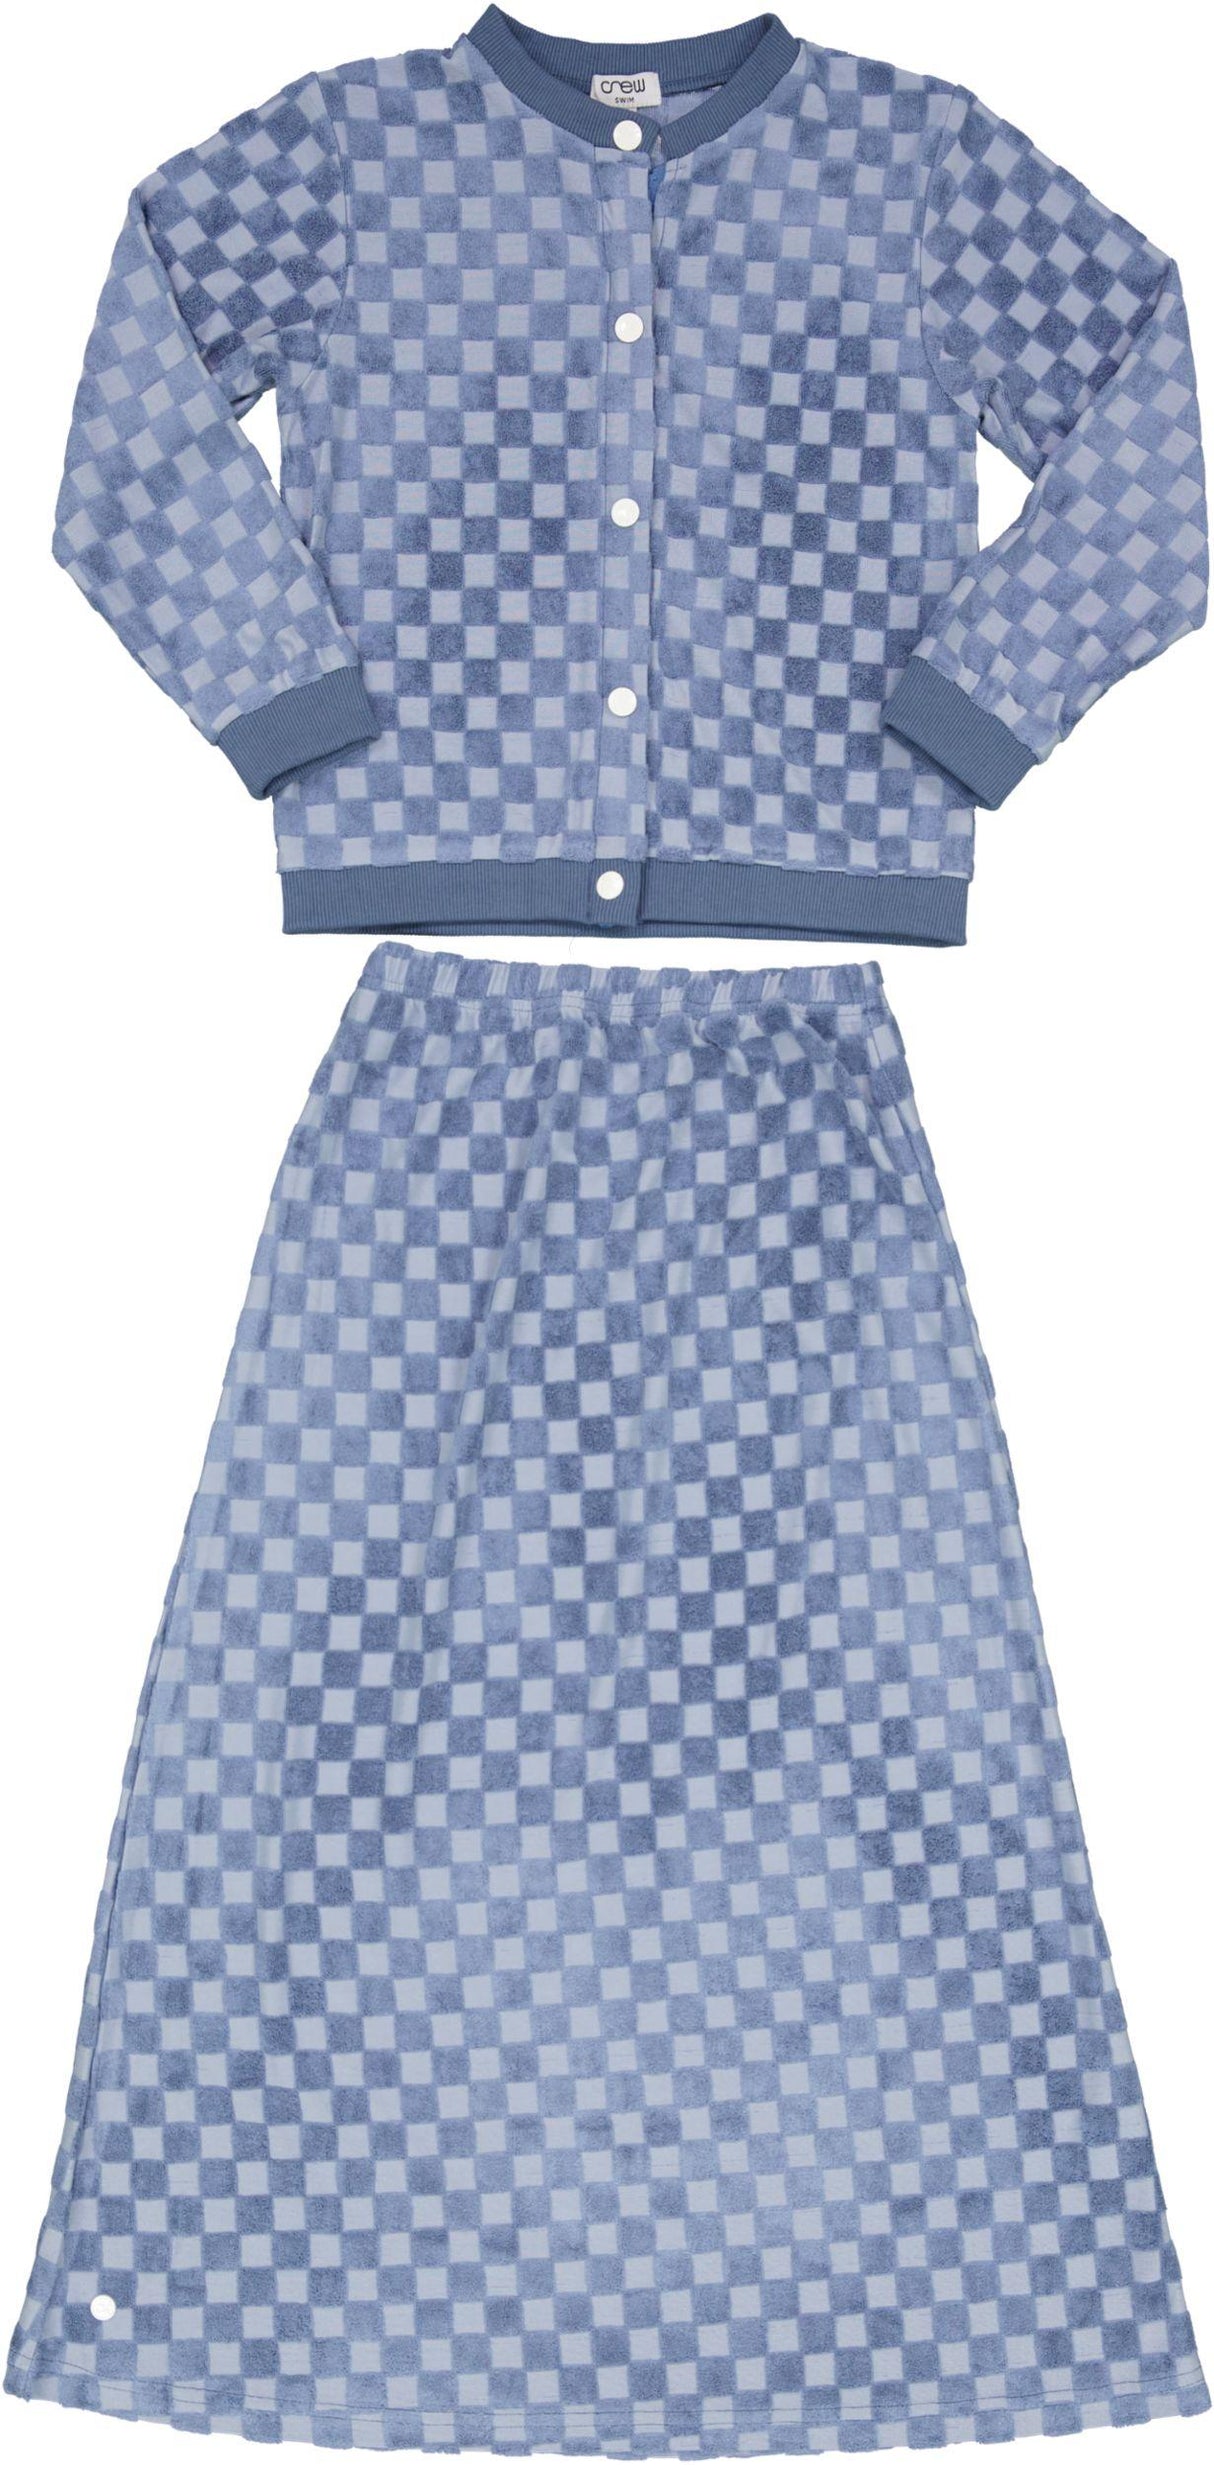 Crew Kids Girls Checkered Terry Outfit - AL25131